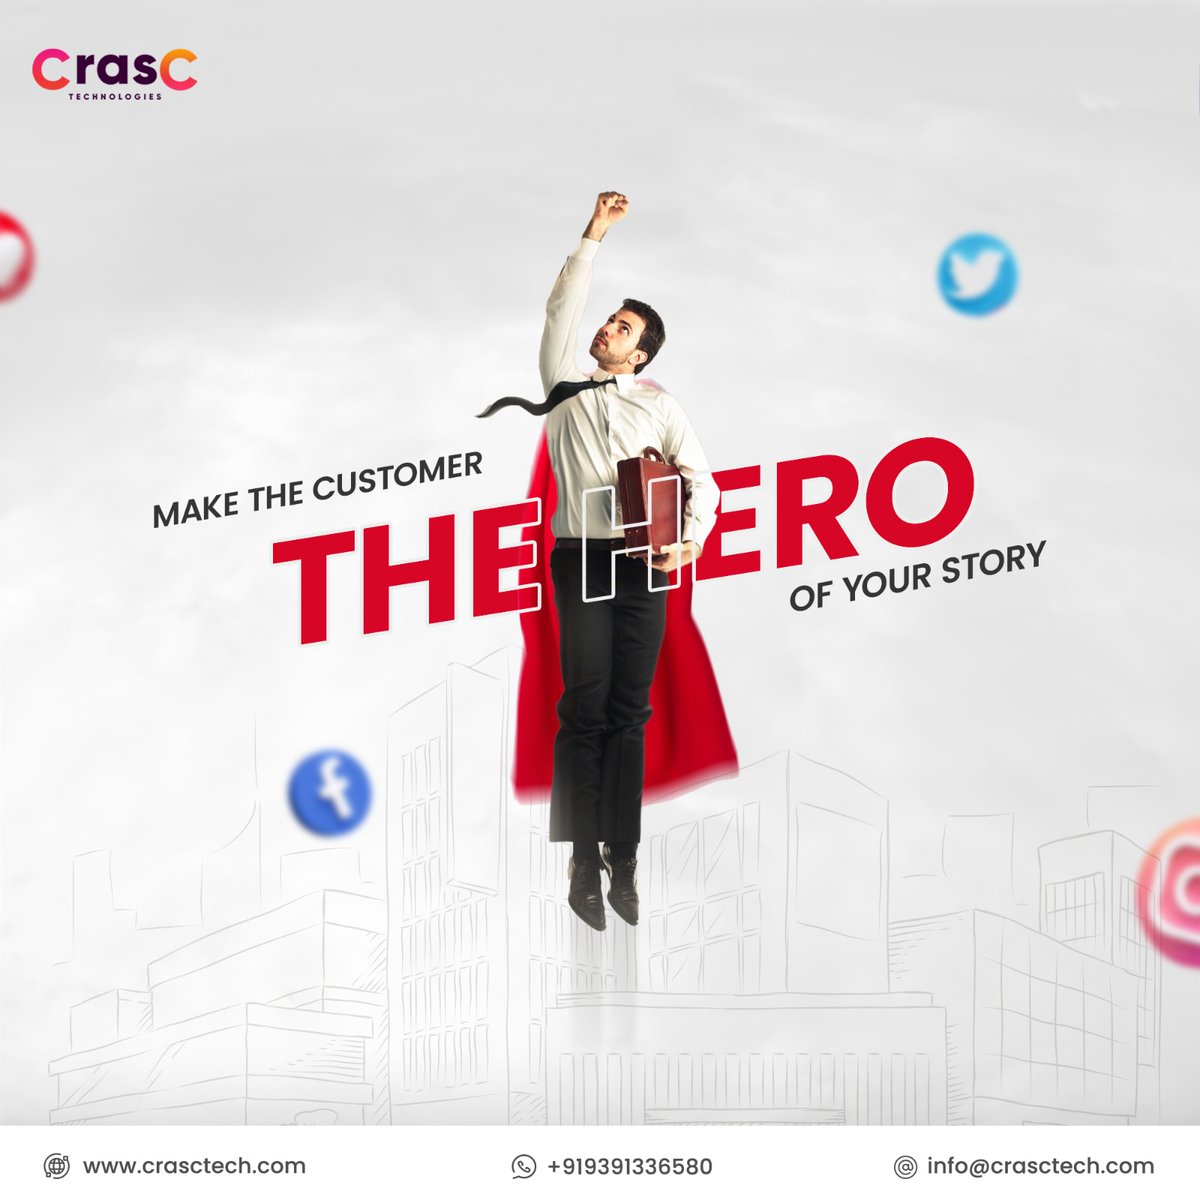 🕶Make the customer the hero of your story 👊

🤠It's all about making our #customers the stars of their own #success stories! At #crasctech, you're the hero of the journey. 🦸‍
#crasctech #digitalmarketing #socialmediamarketing #customersfirst #customersuccess #digitalworld